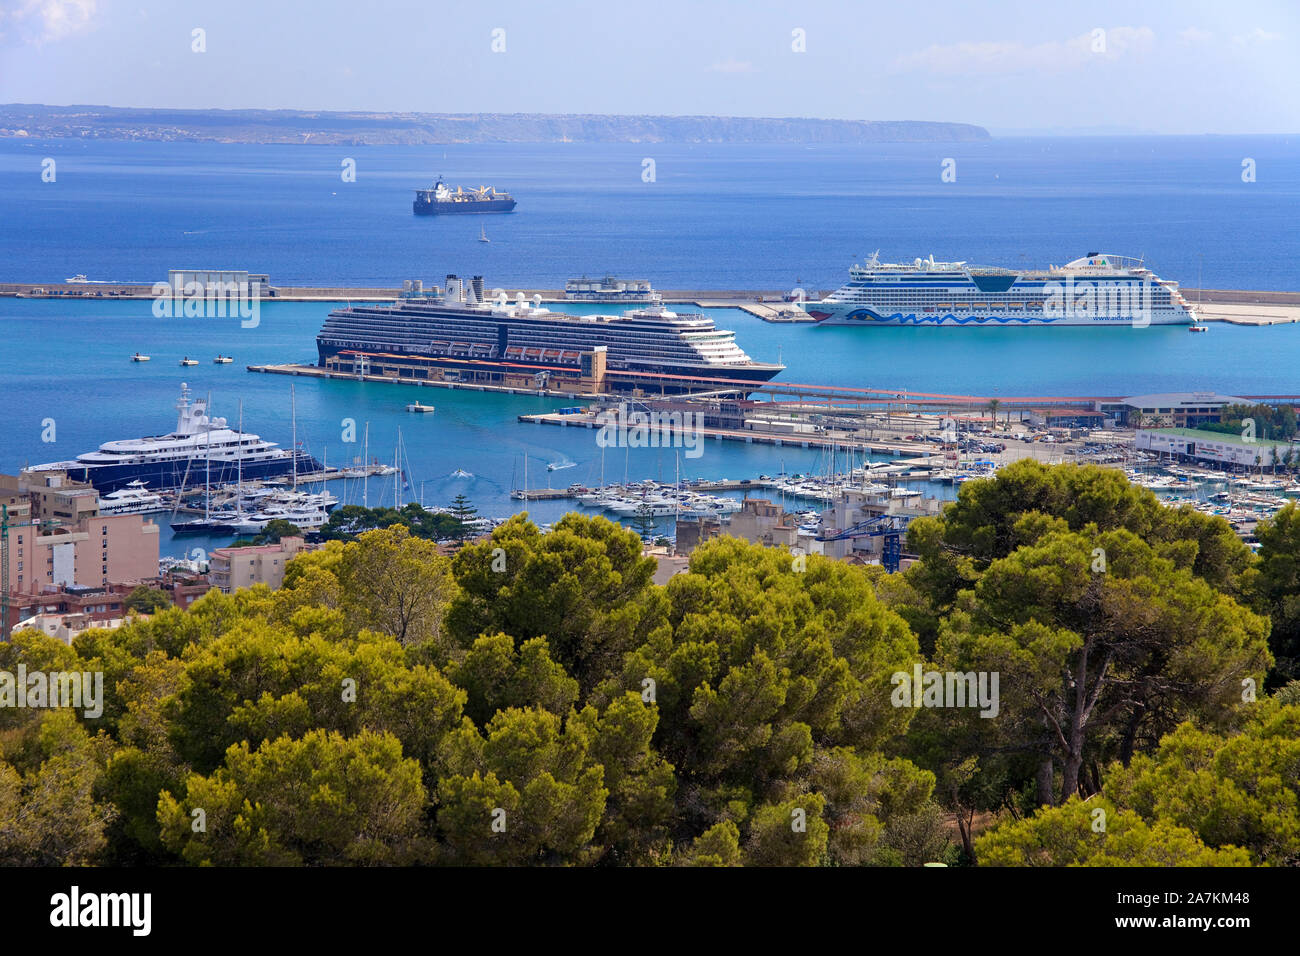 View from Bellver castle on the terminal for cruise liners, Palma, Palma de Mallorca, Mallorca, Balearic islands, Spain Stock Photo